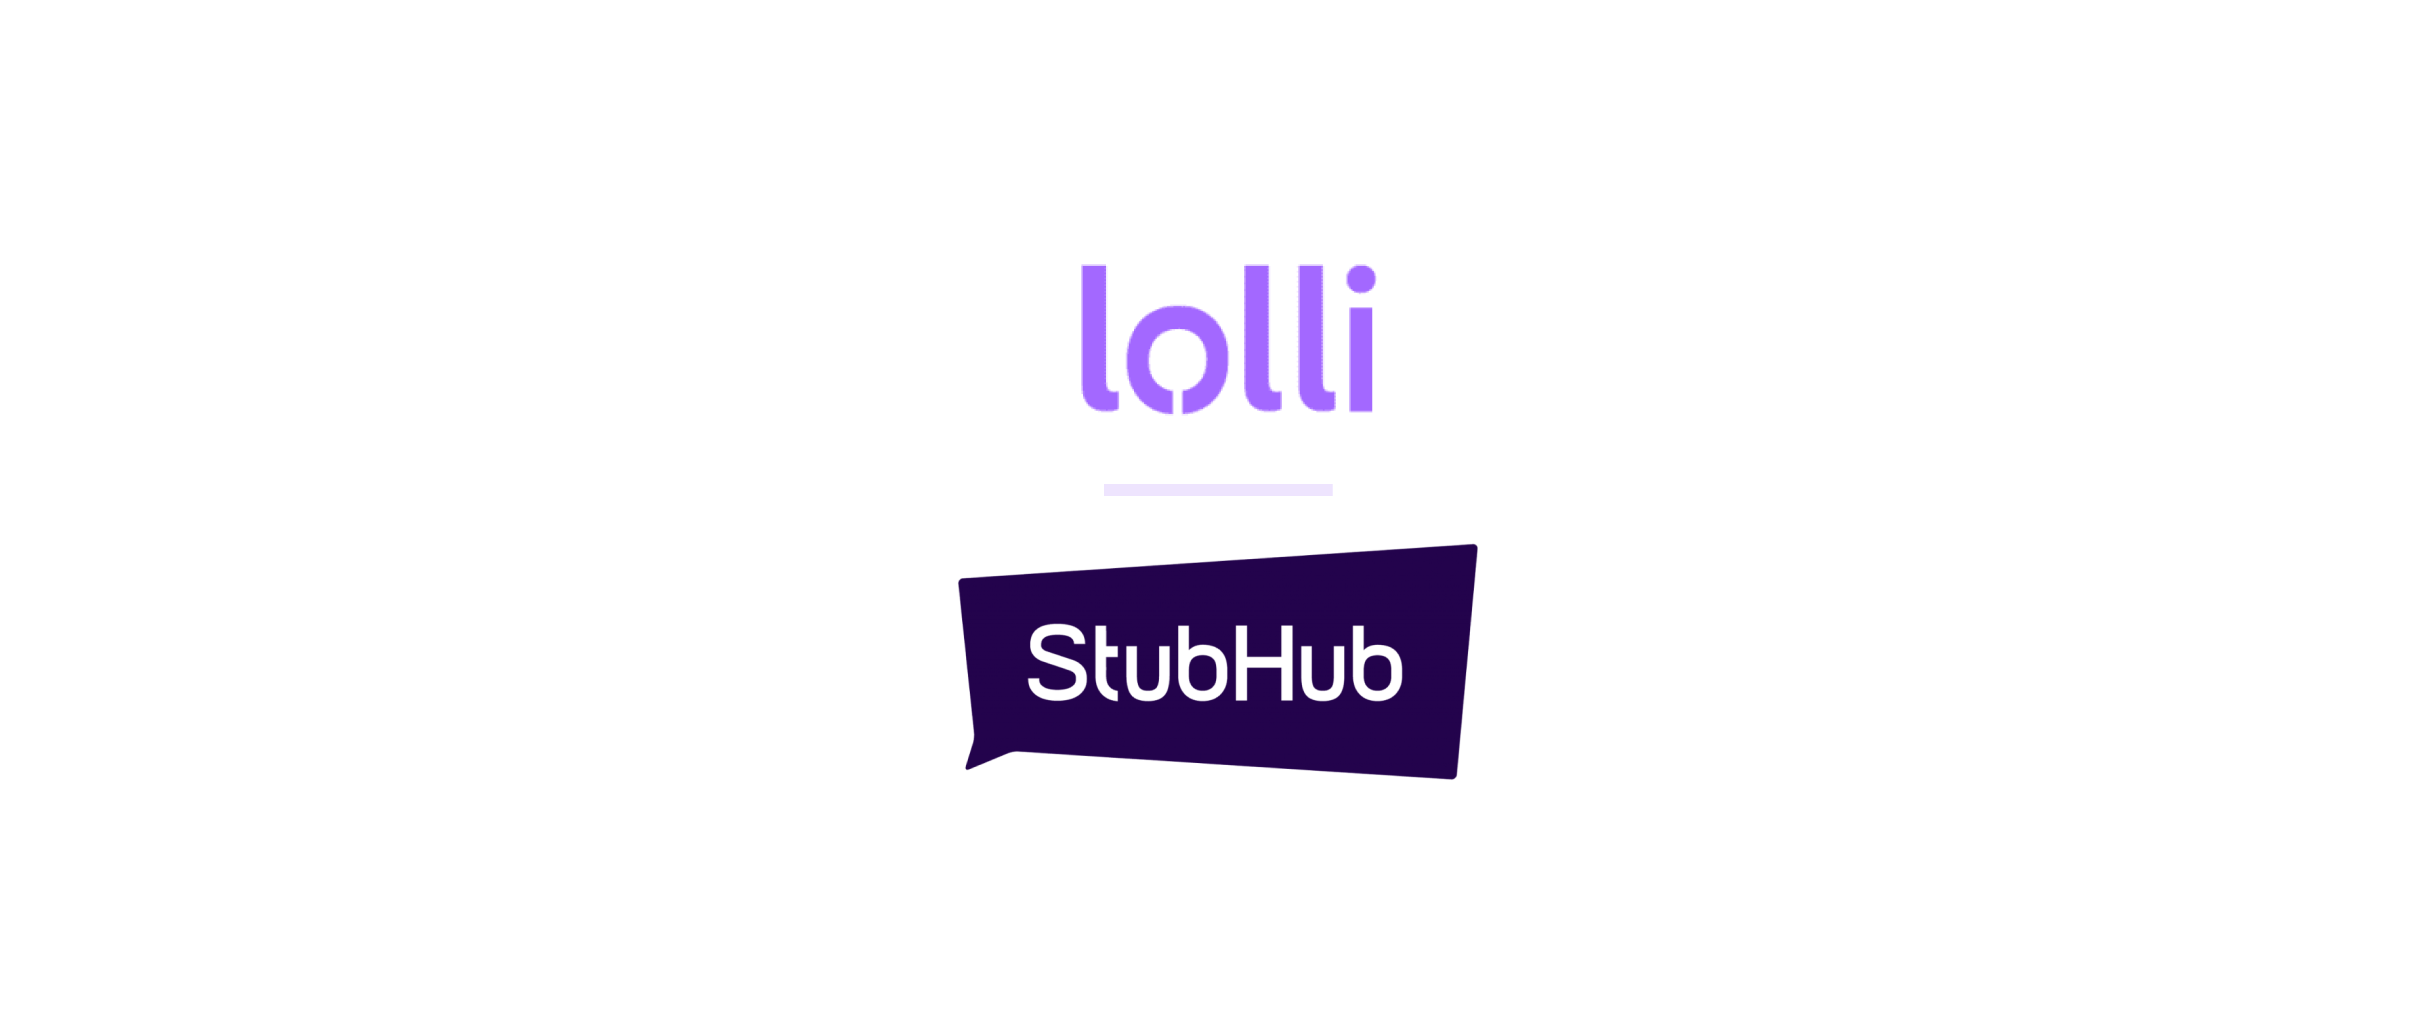 StubHub Partners With Lolli To Give Bitcoin Back on Millions of Live Events